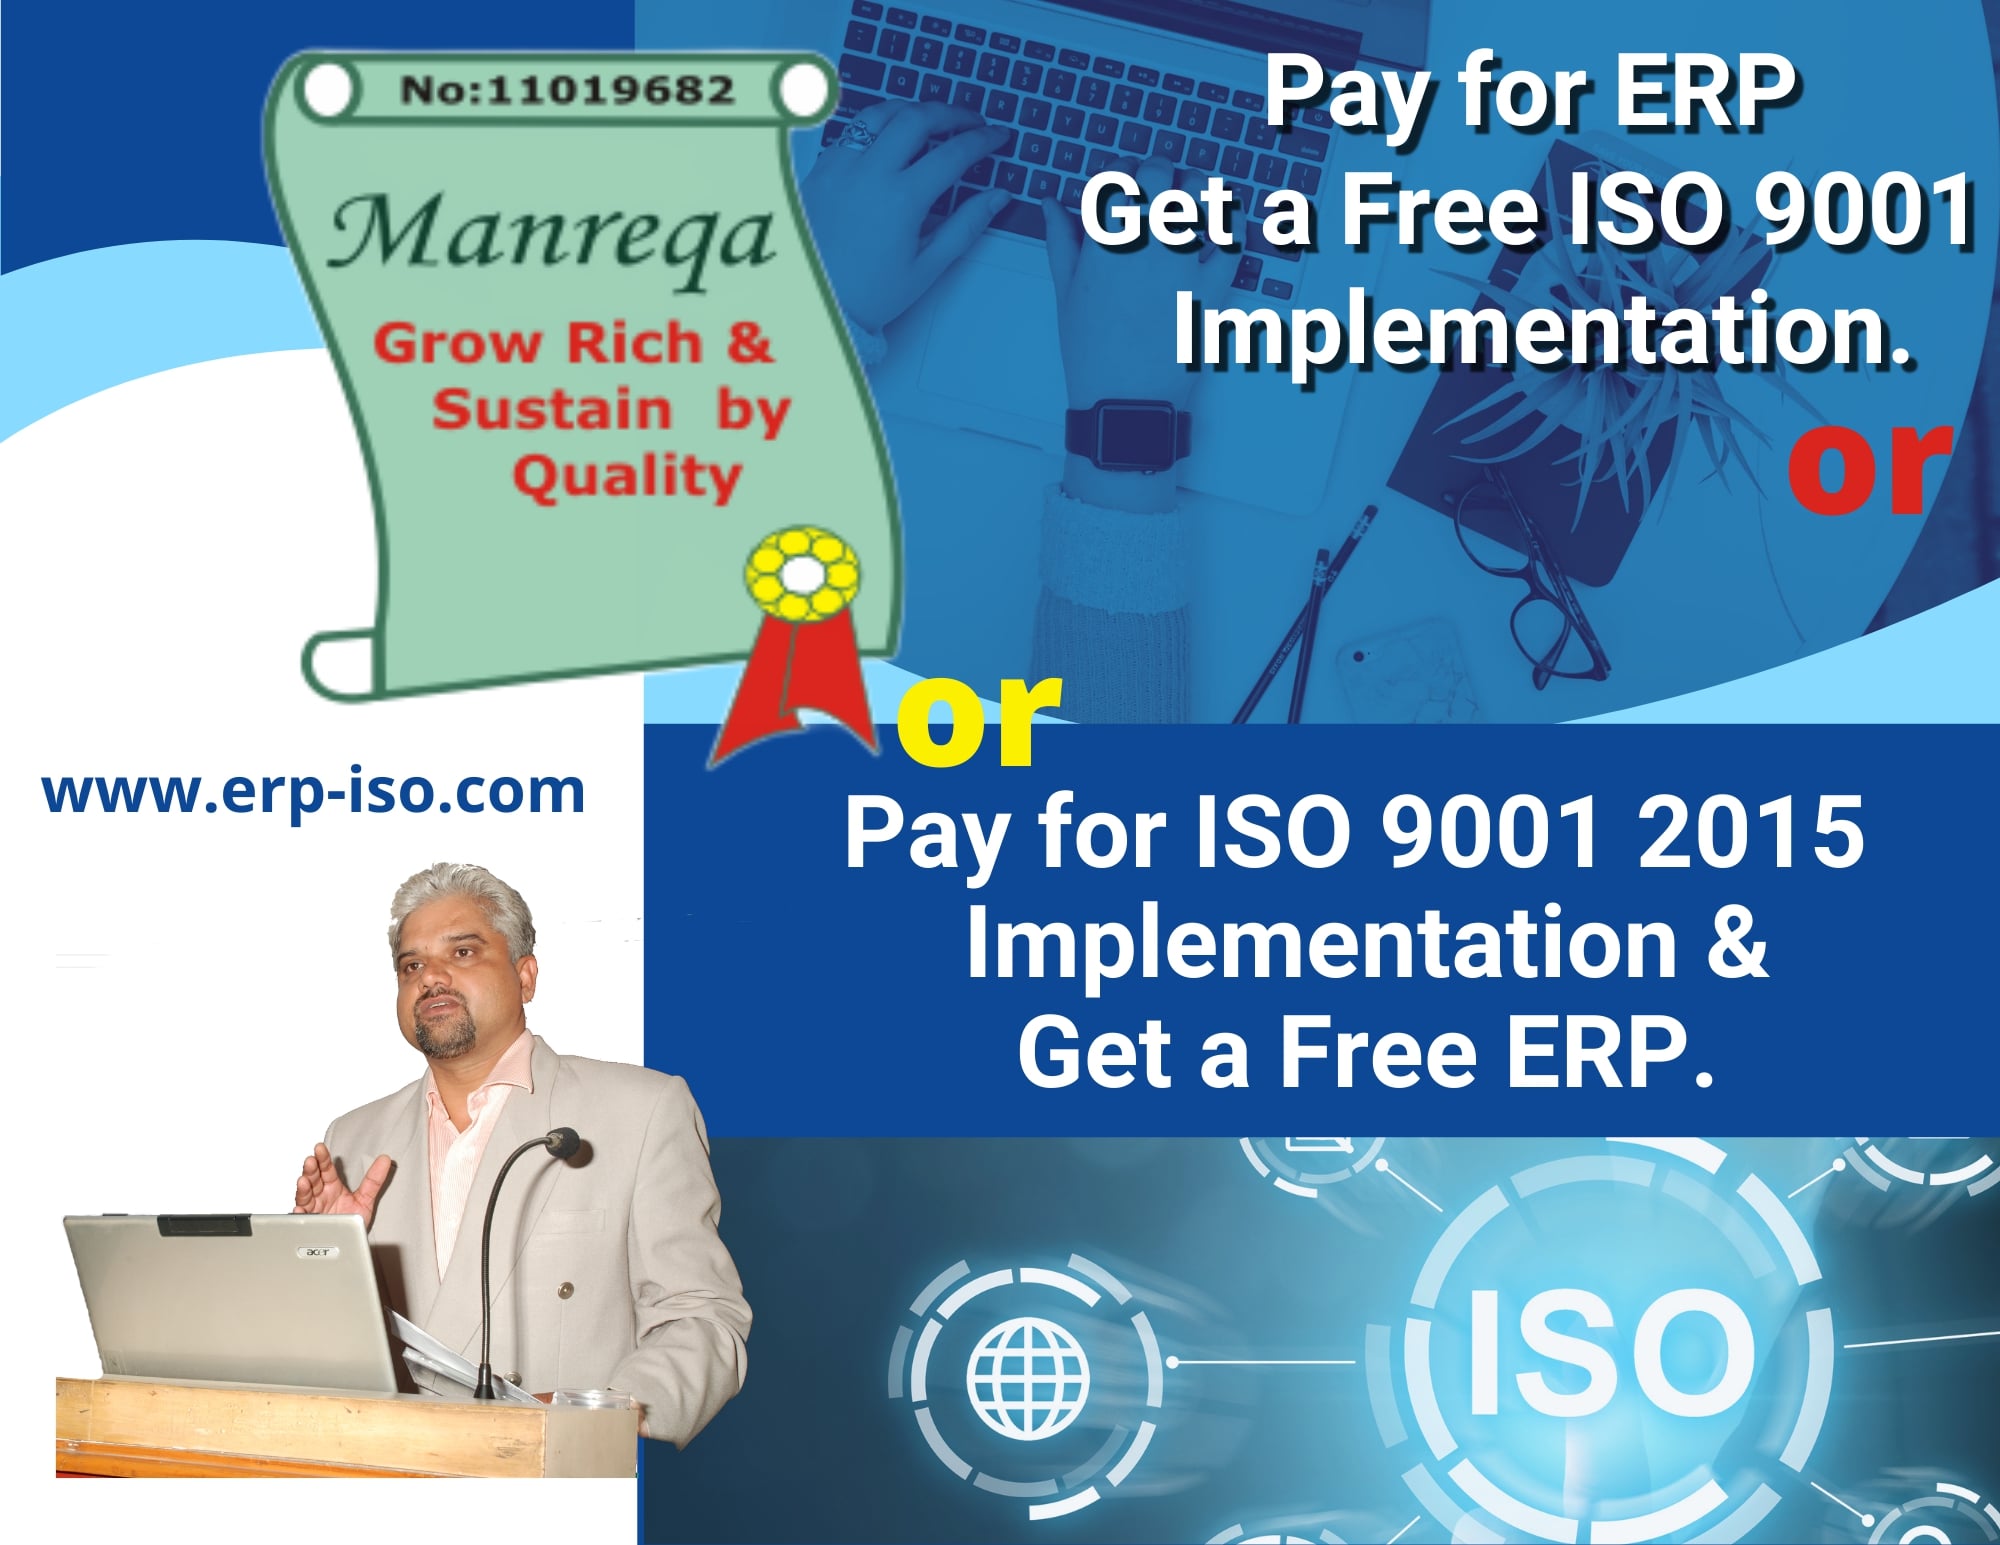 Pay for ERP Get a Free ISO 9001 Implementation. or Pay for ISO 9001 Implementation & get a free ERP.